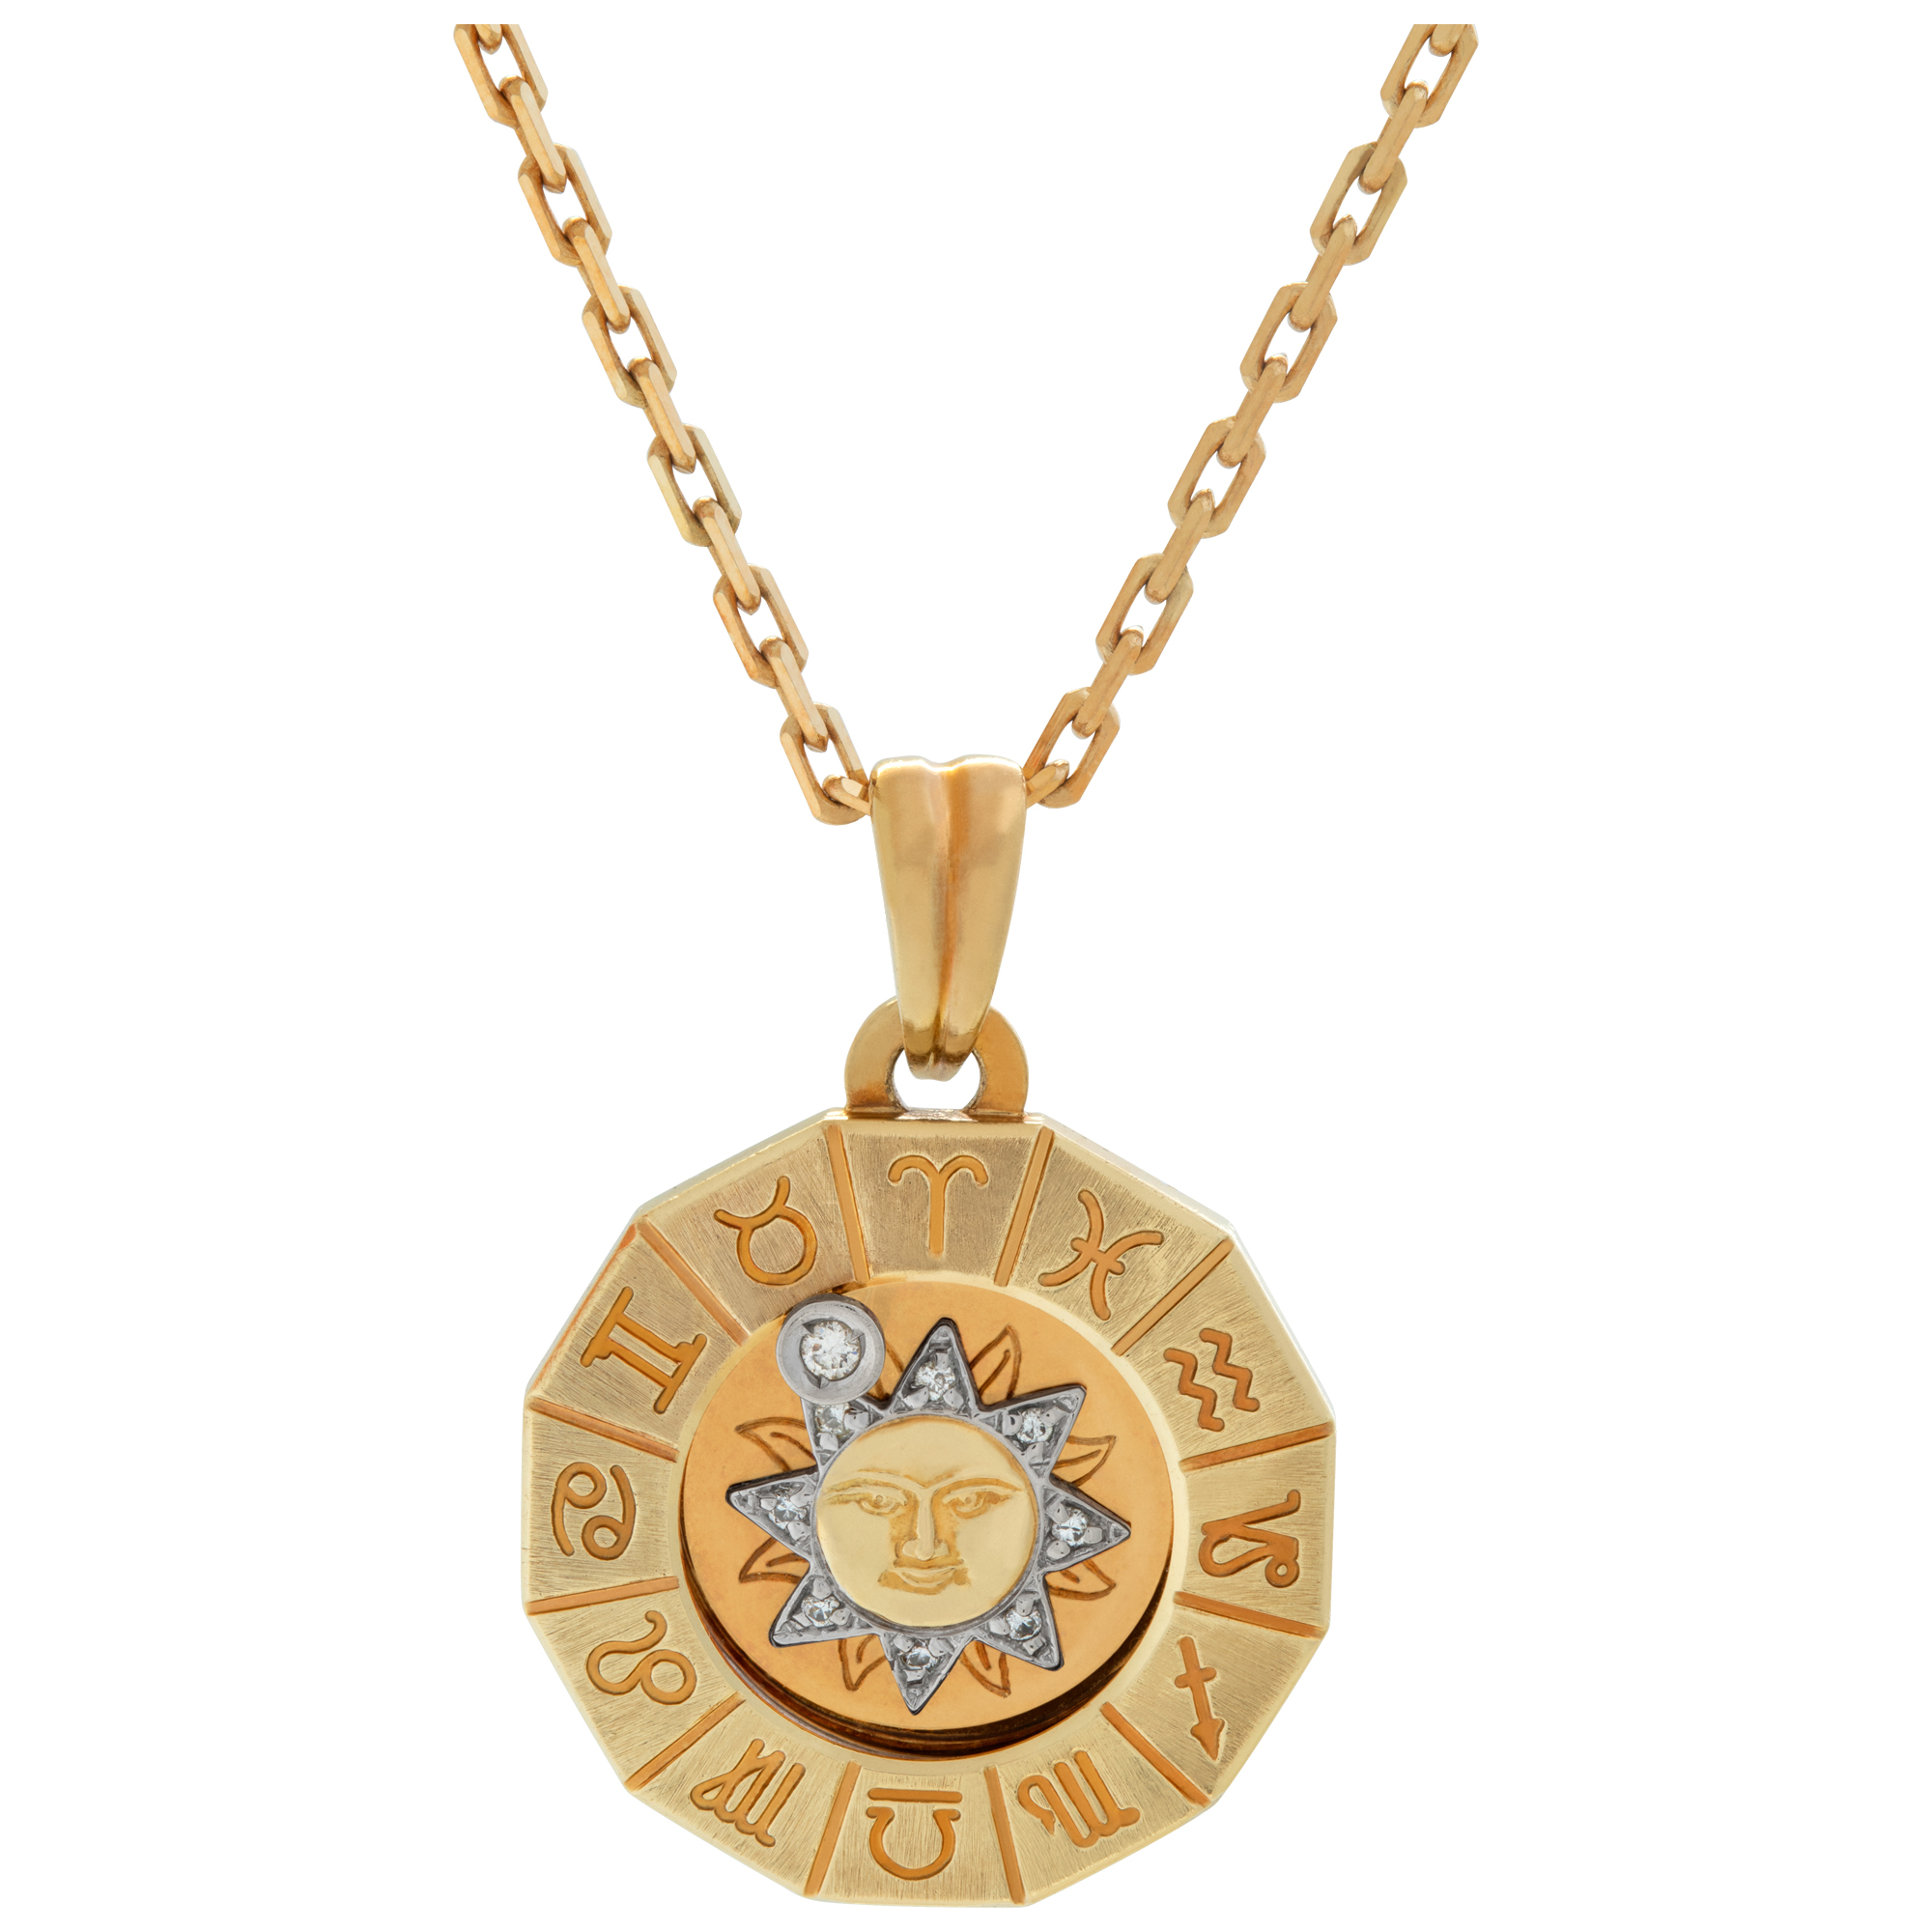 Zodiac pendant necklace in 18k yellow gold with accent diamond